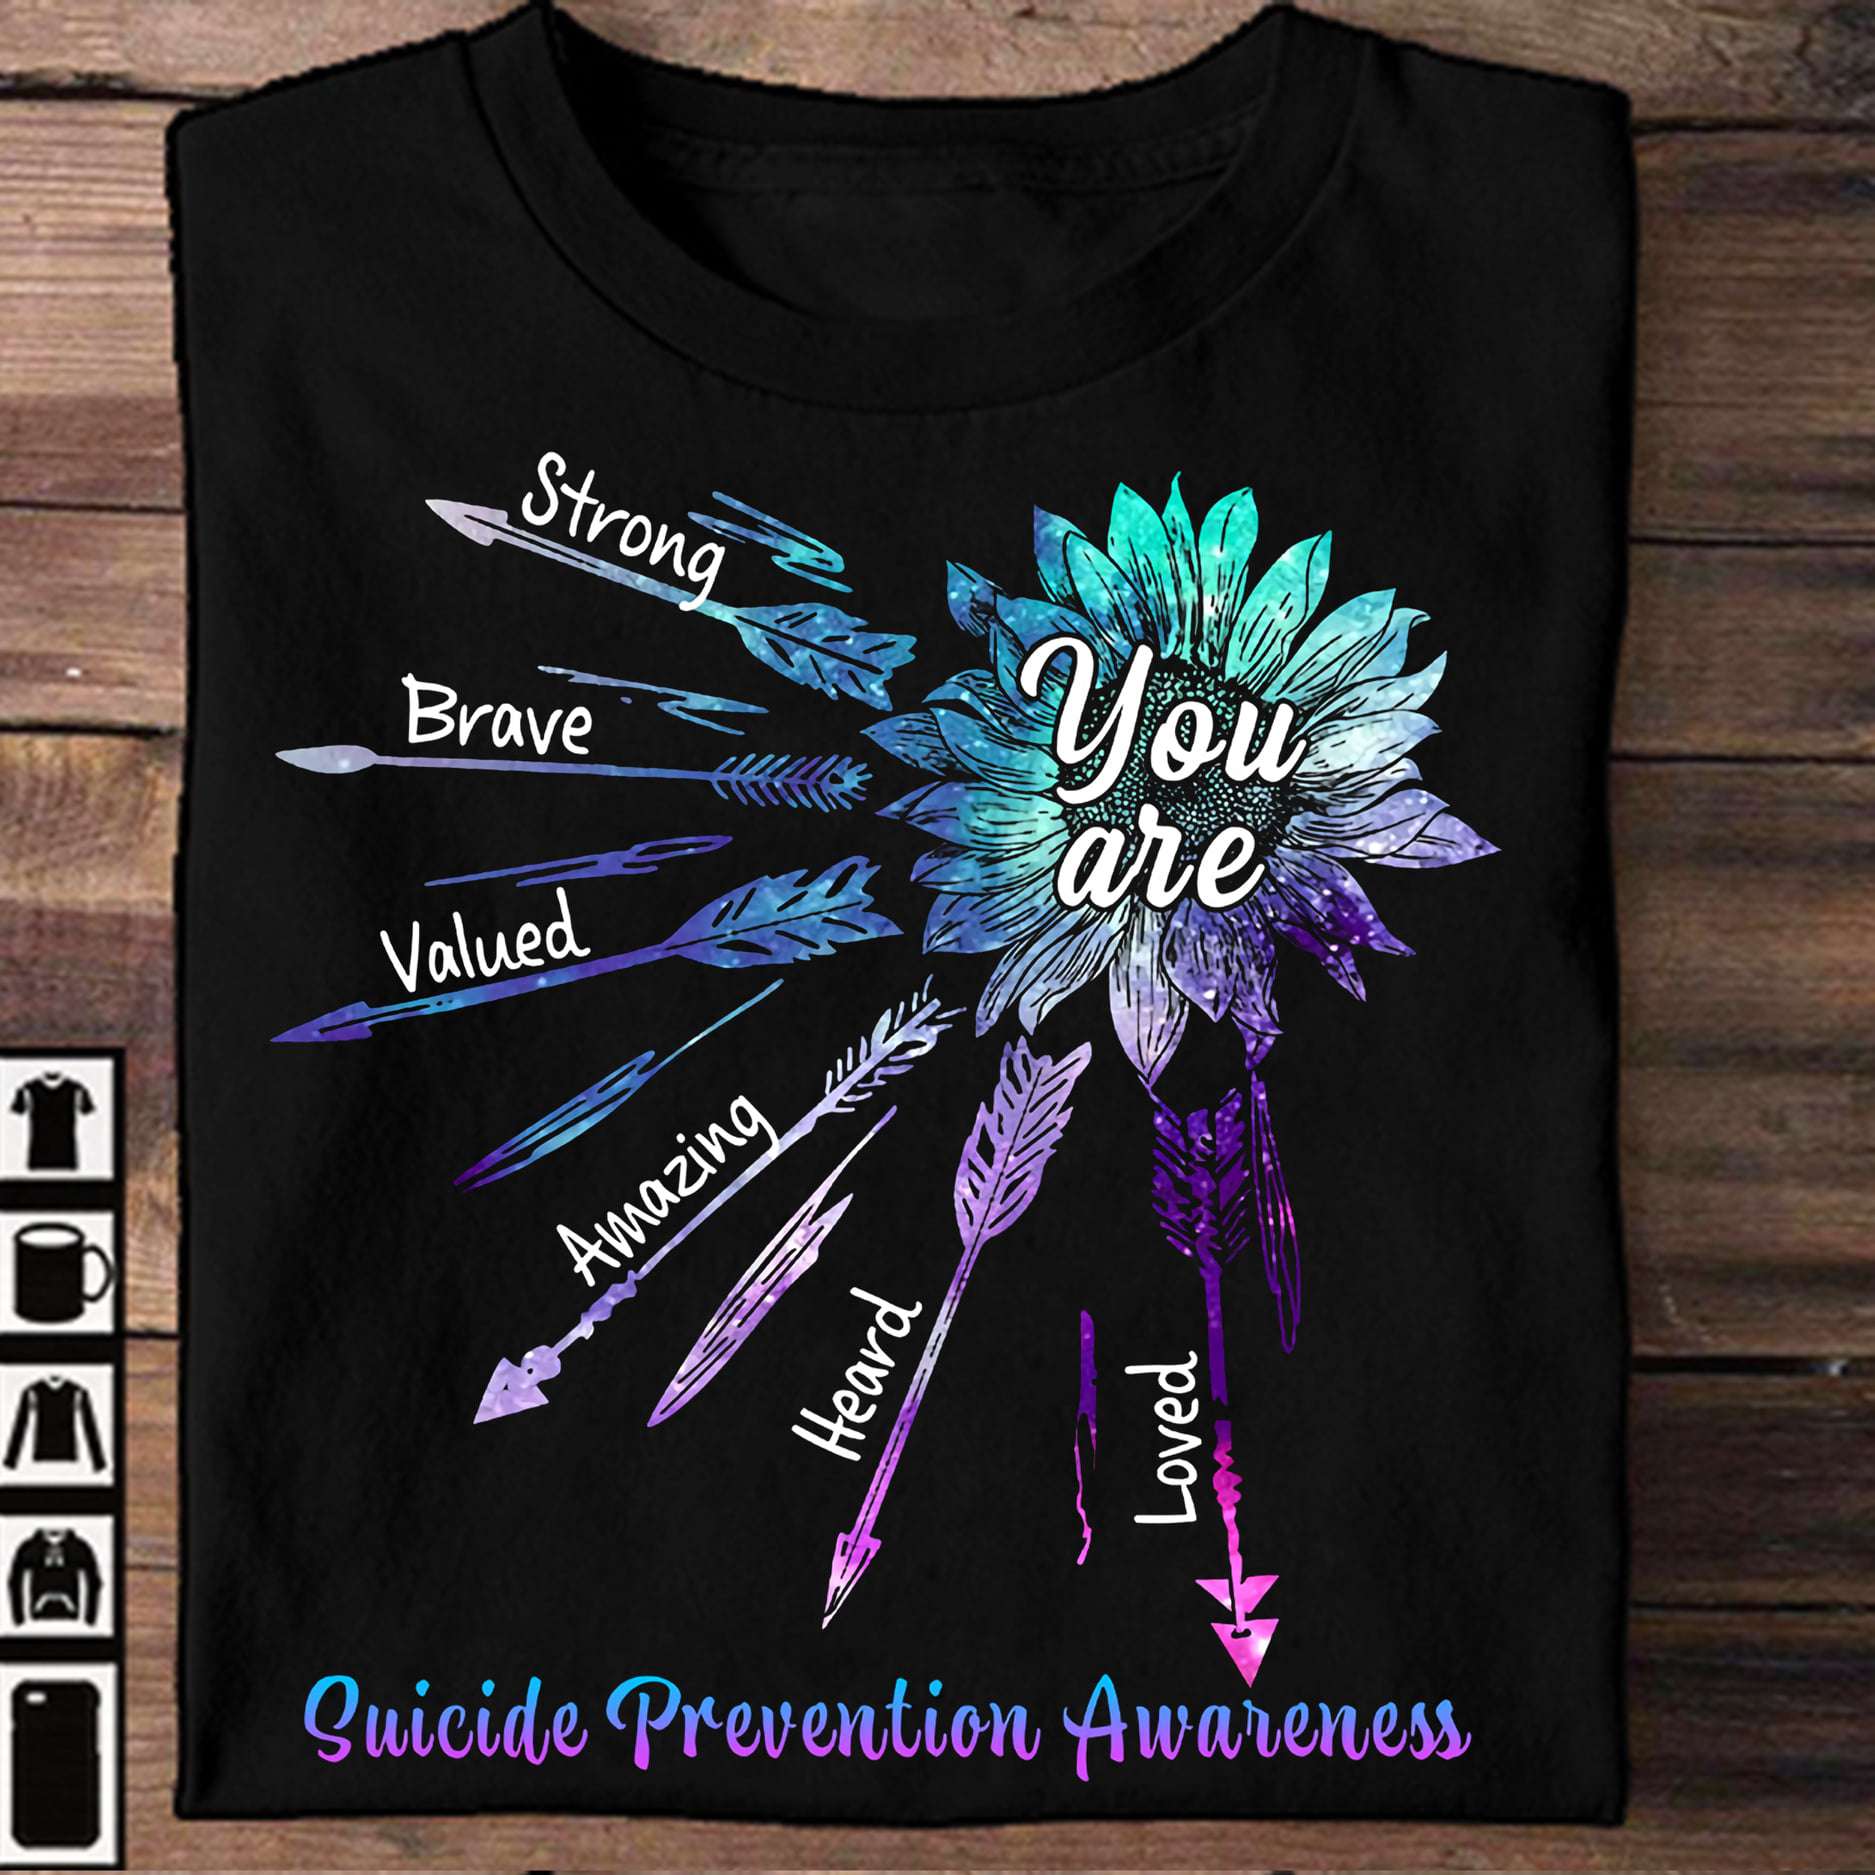 Suicide Sunflower - Strong brave valued amazing heard loved suicide prevention awareness